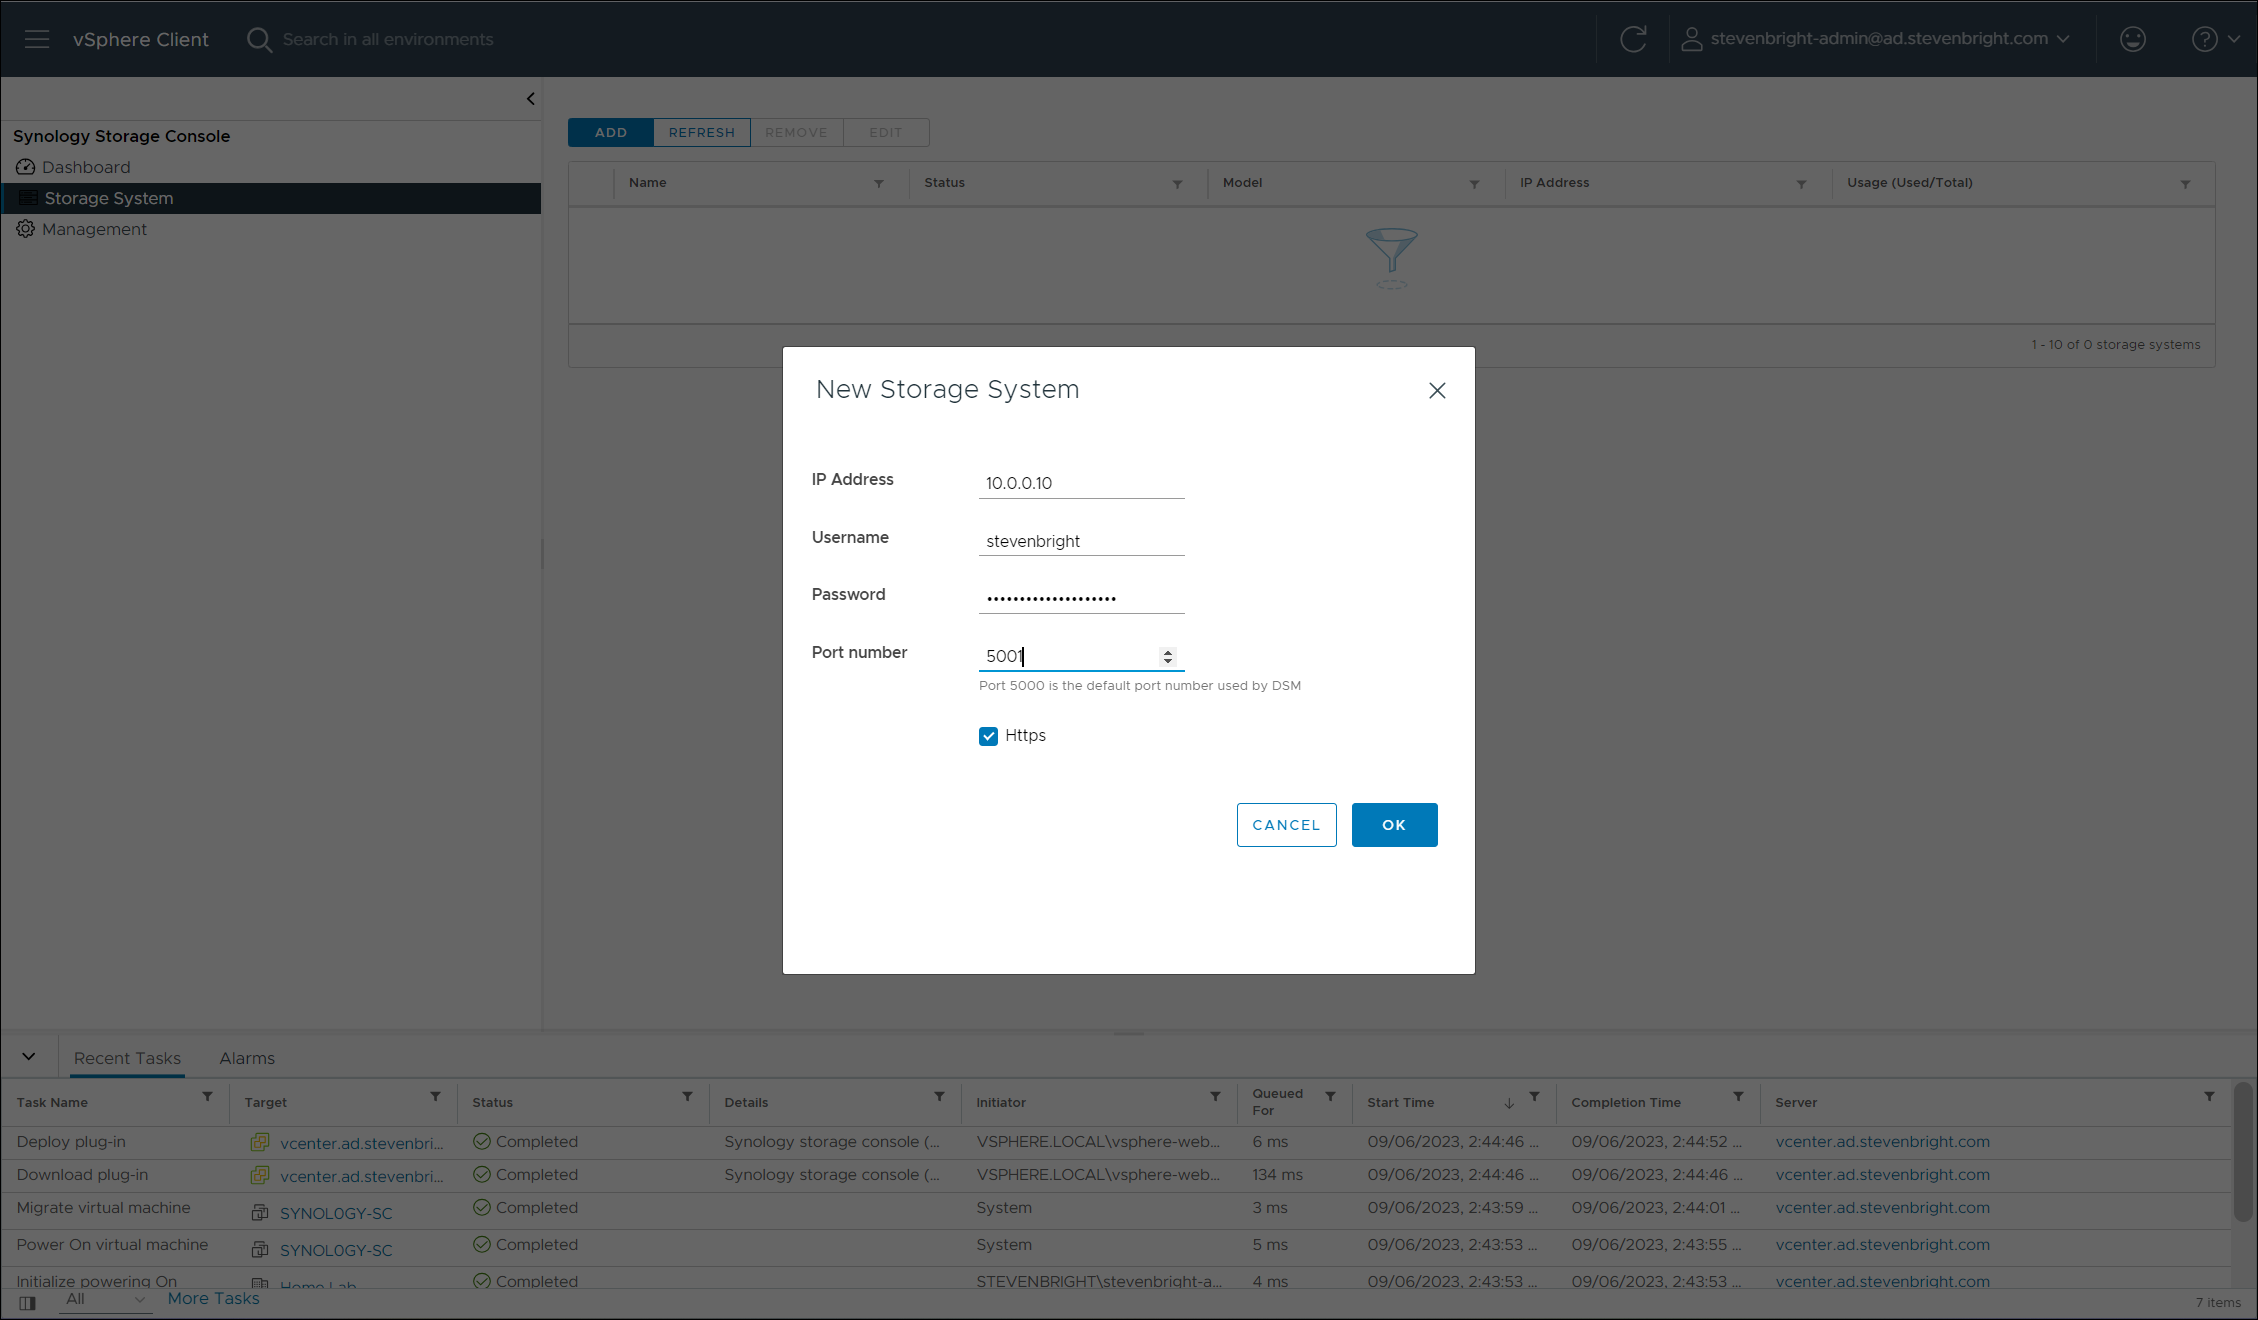 Synology Storage Console for VMware - New Storage System Dialog